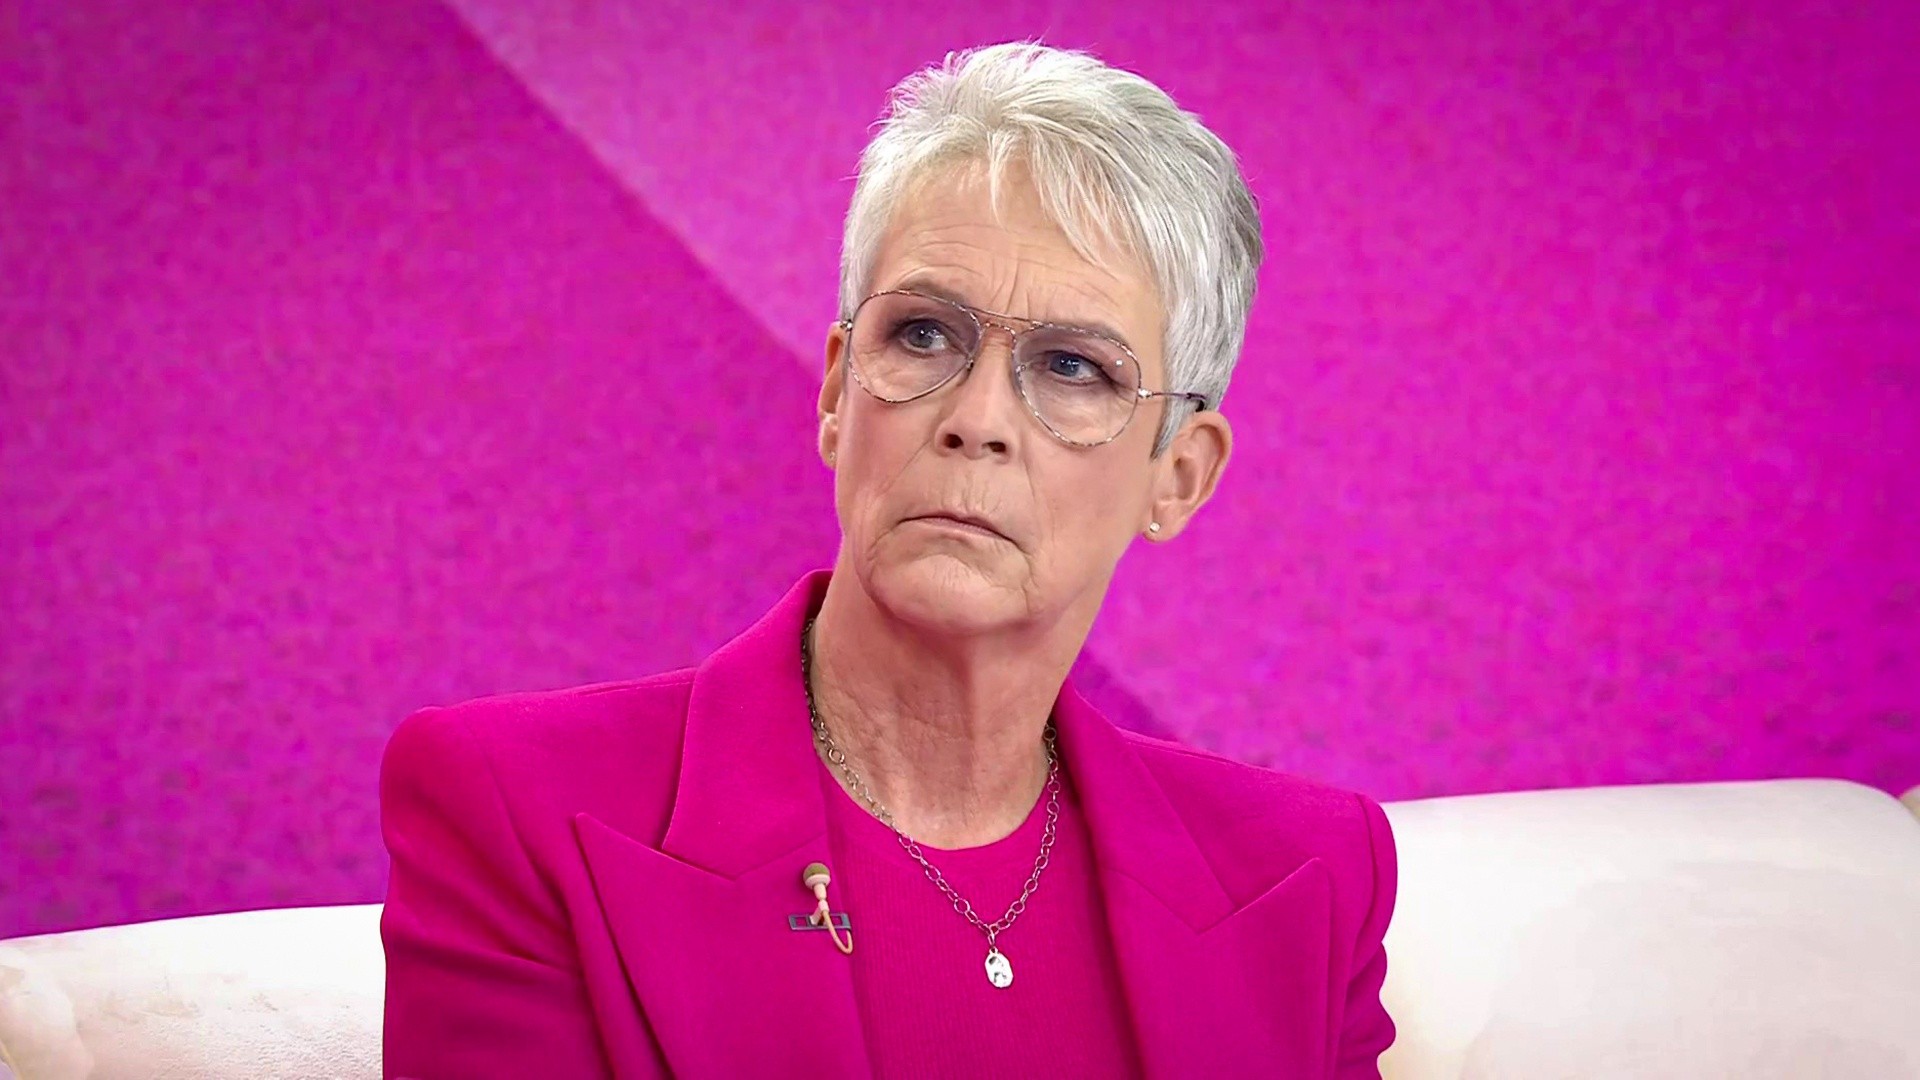 Jamie Lee Curtis Reacts To Kanye West's Antisemitic Social Media Posts:  'Just Abhorrent'